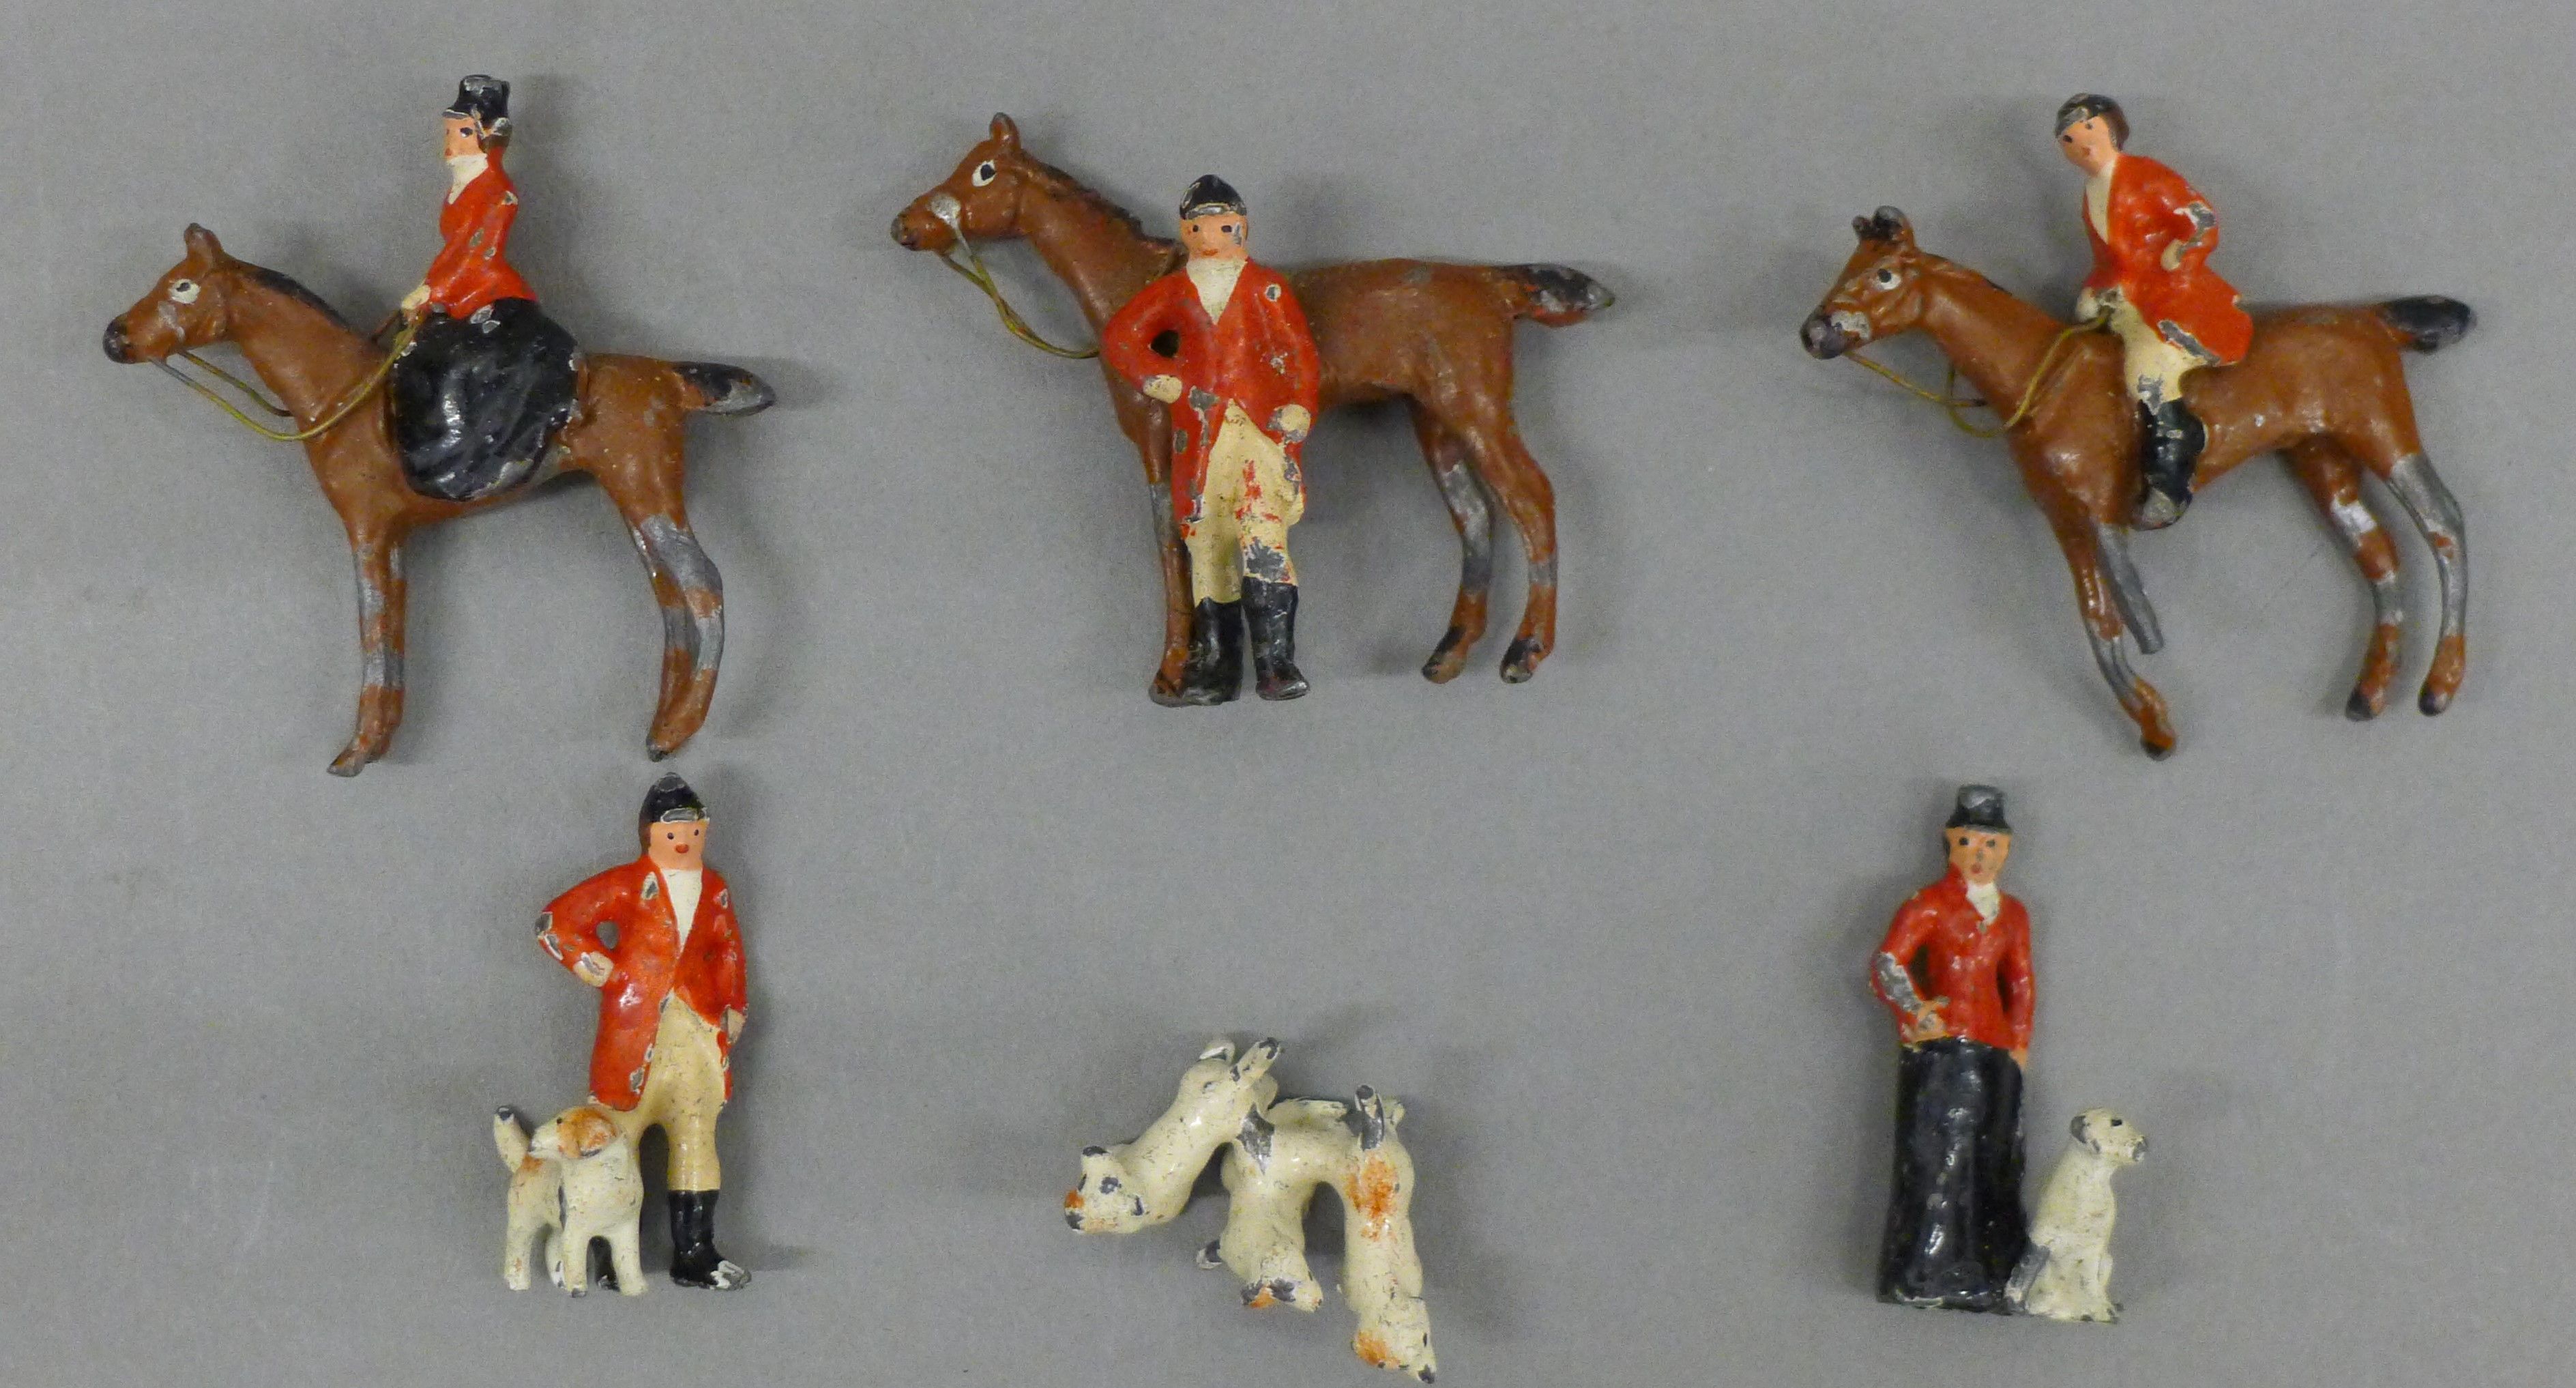 A collection of Britain's hunting lead figures.